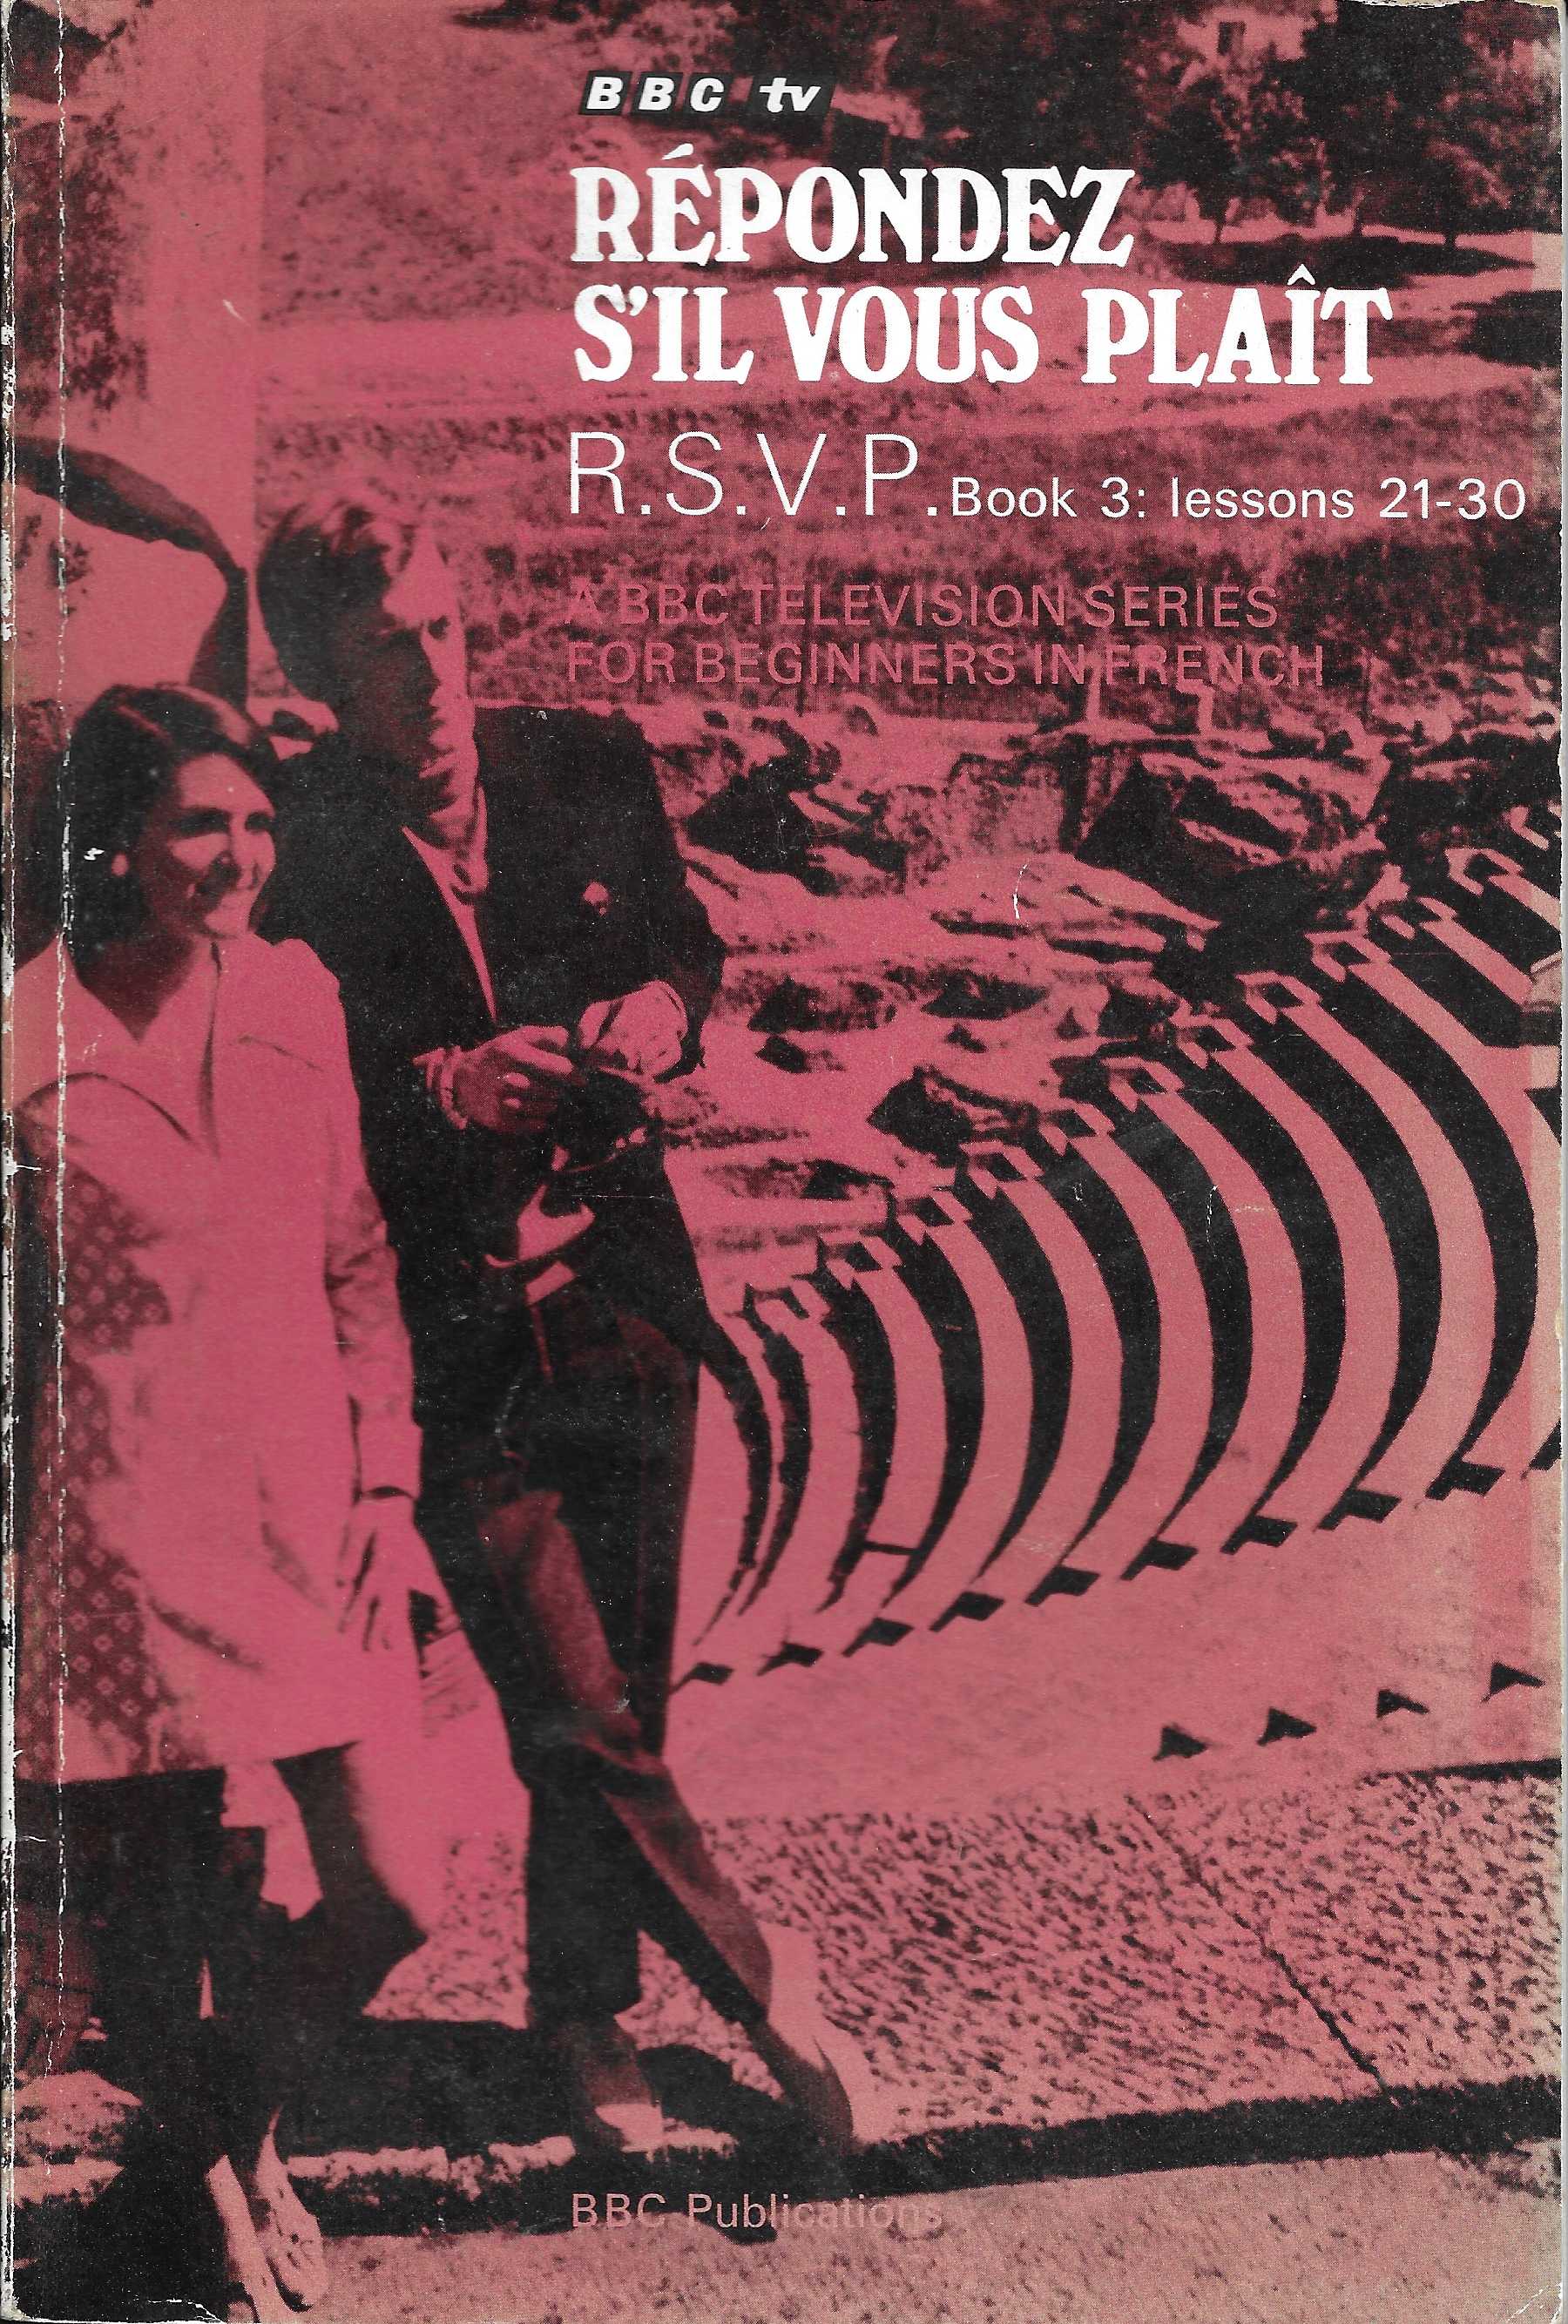 Picture of ISBN 0 563 09361 7 Respondez s'il vous plait R. S. V. P. - Lessons 21 - 30 by artist Max Bellancourt / Joseph Cremona from the BBC books - Records and Tapes library